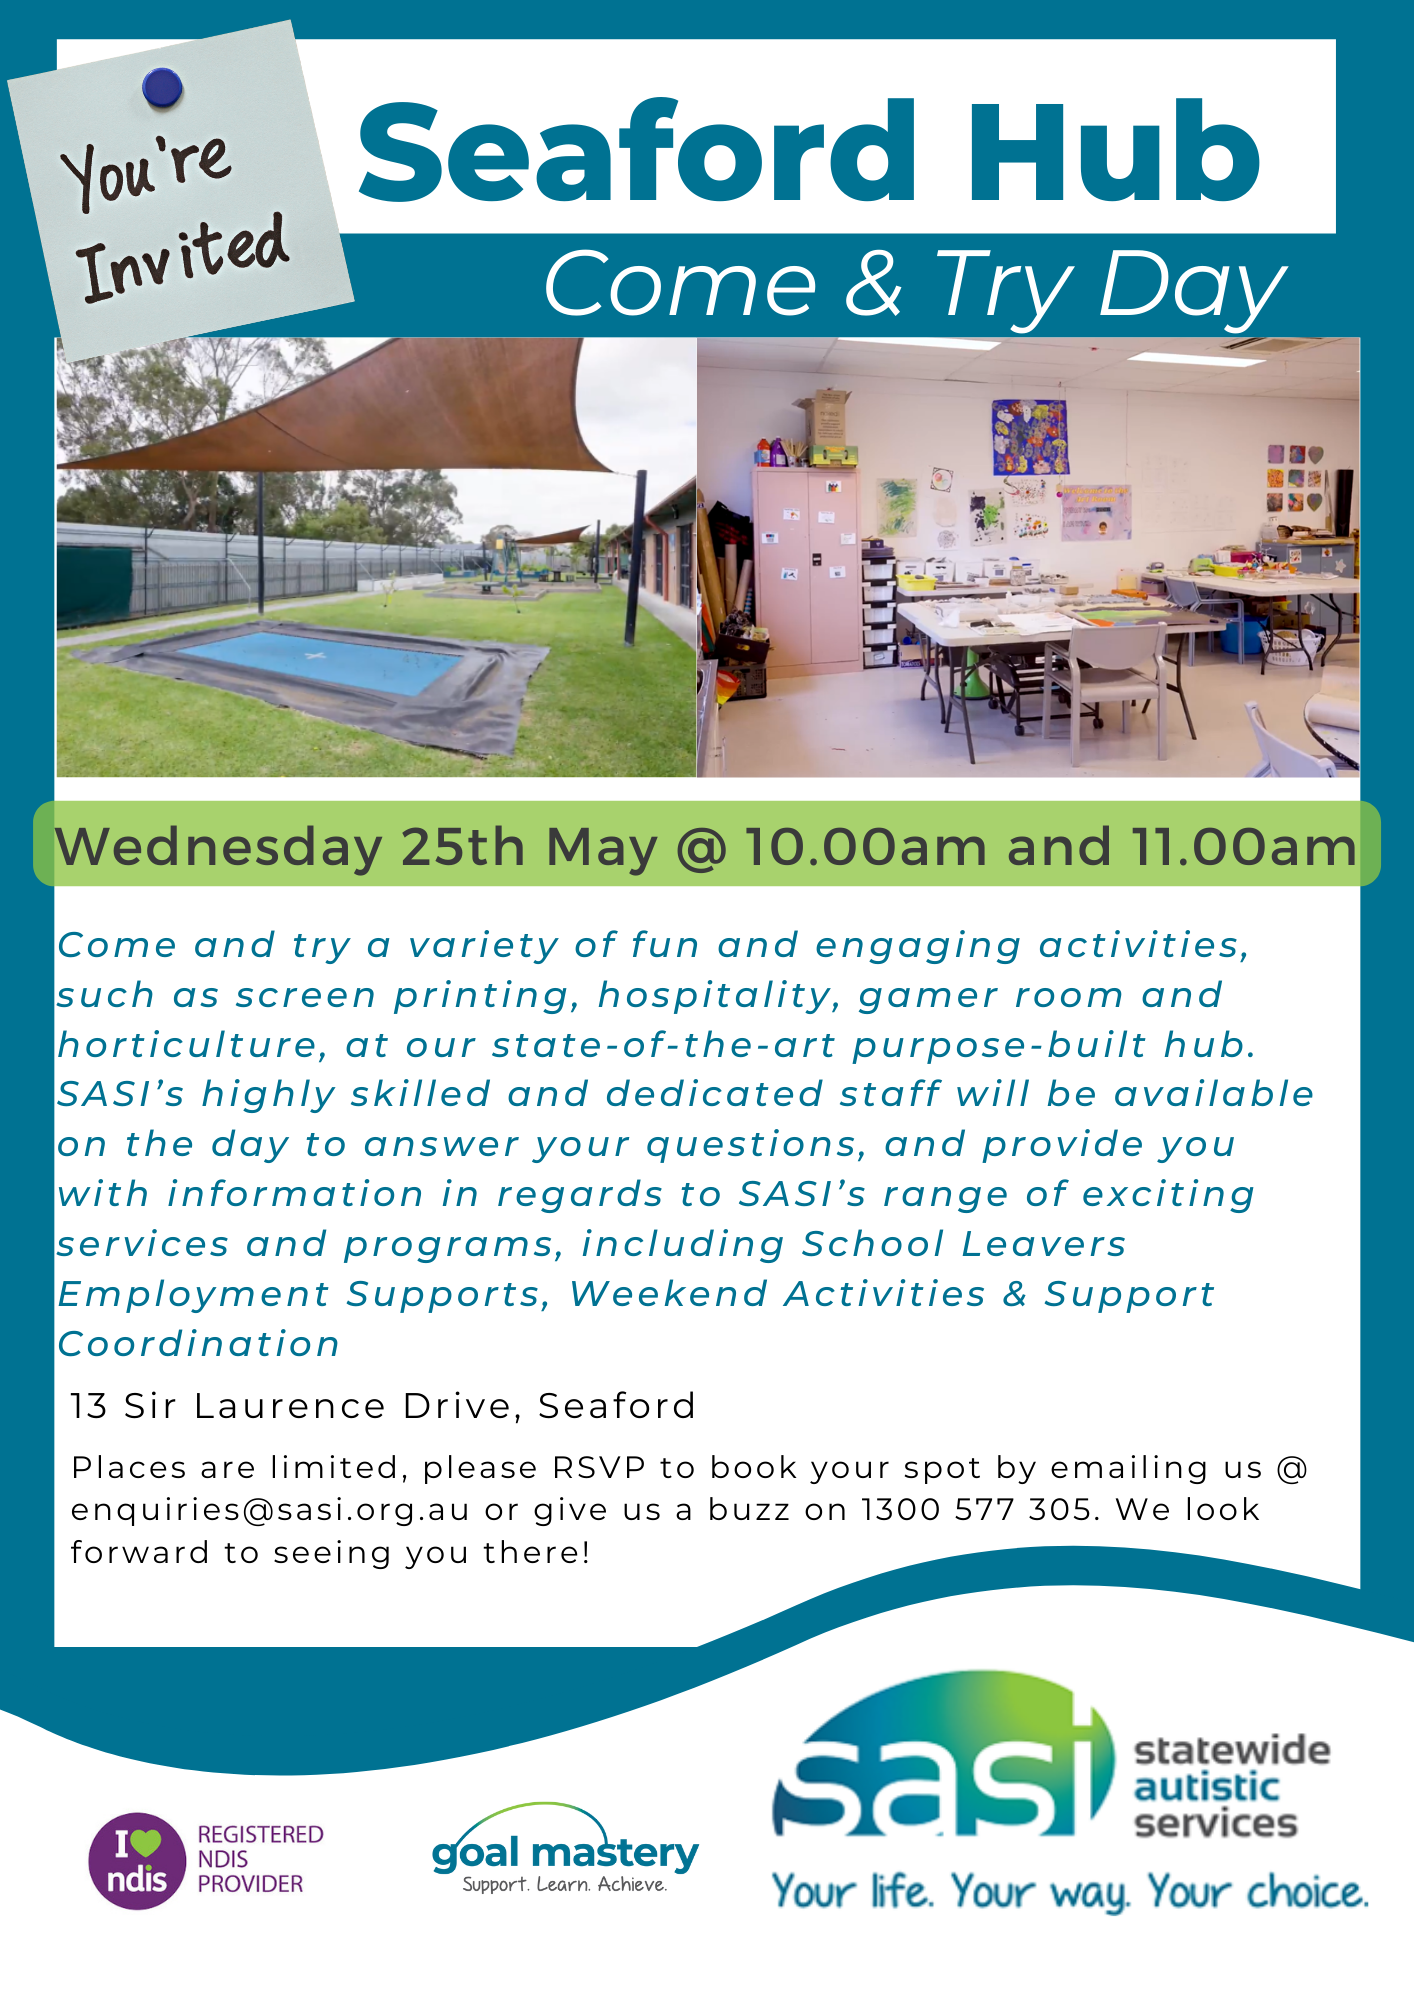 Come & Try Day @ Seaford Hub